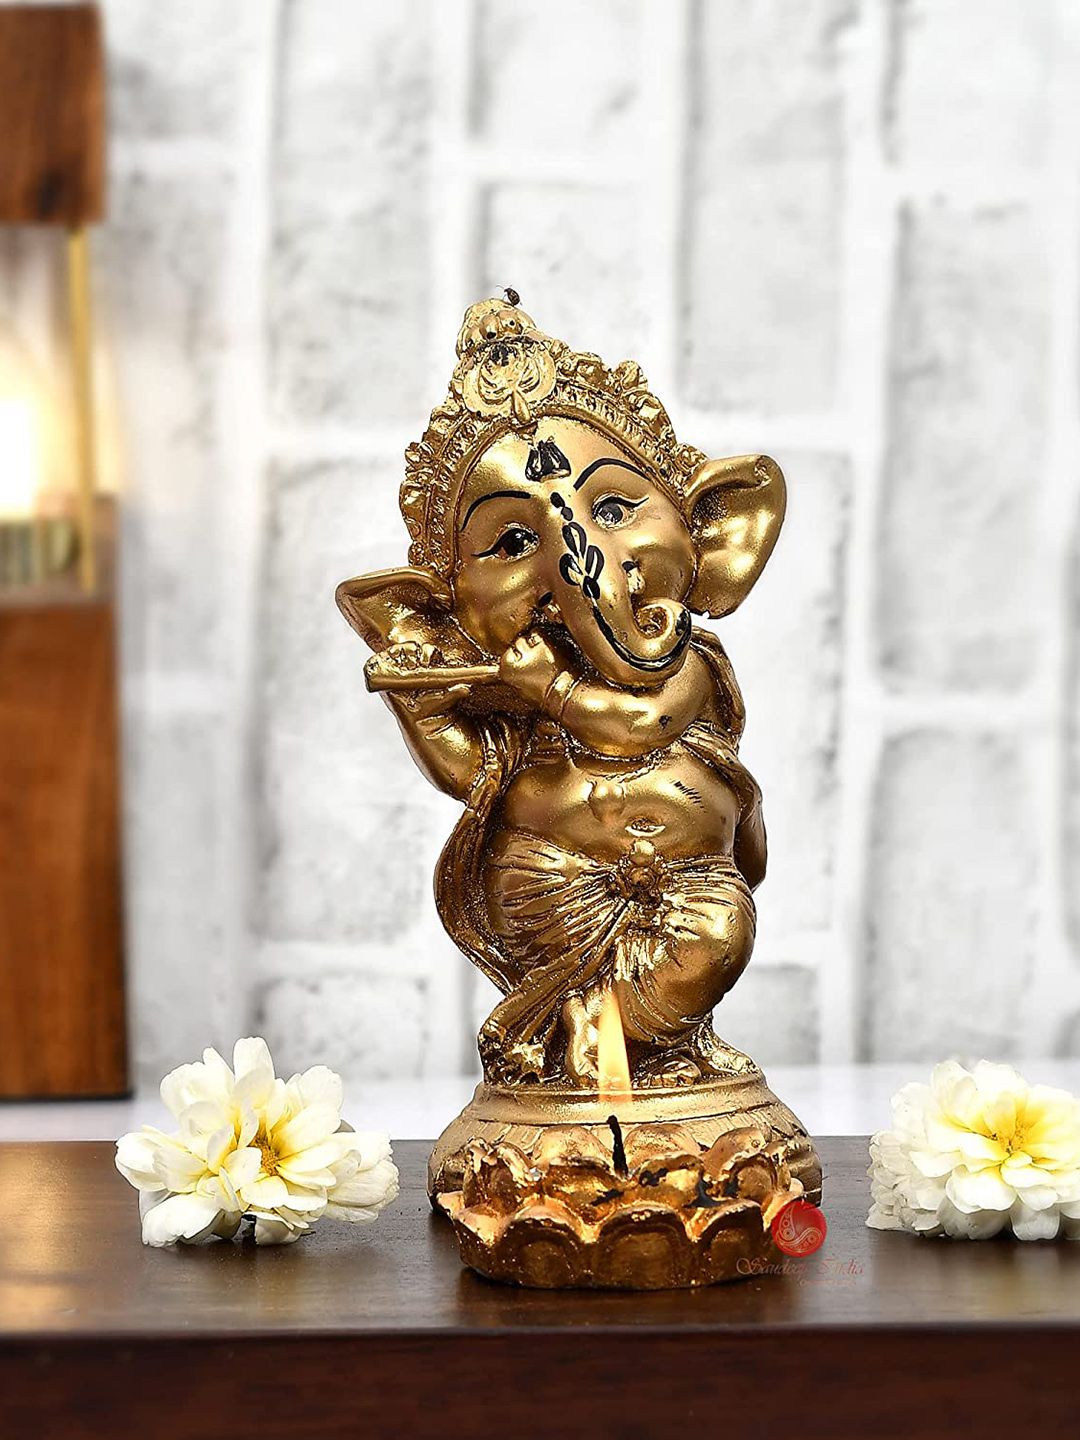 Perpetual Gold-Toned Ganesha Idol Statue Showpiece Price in India